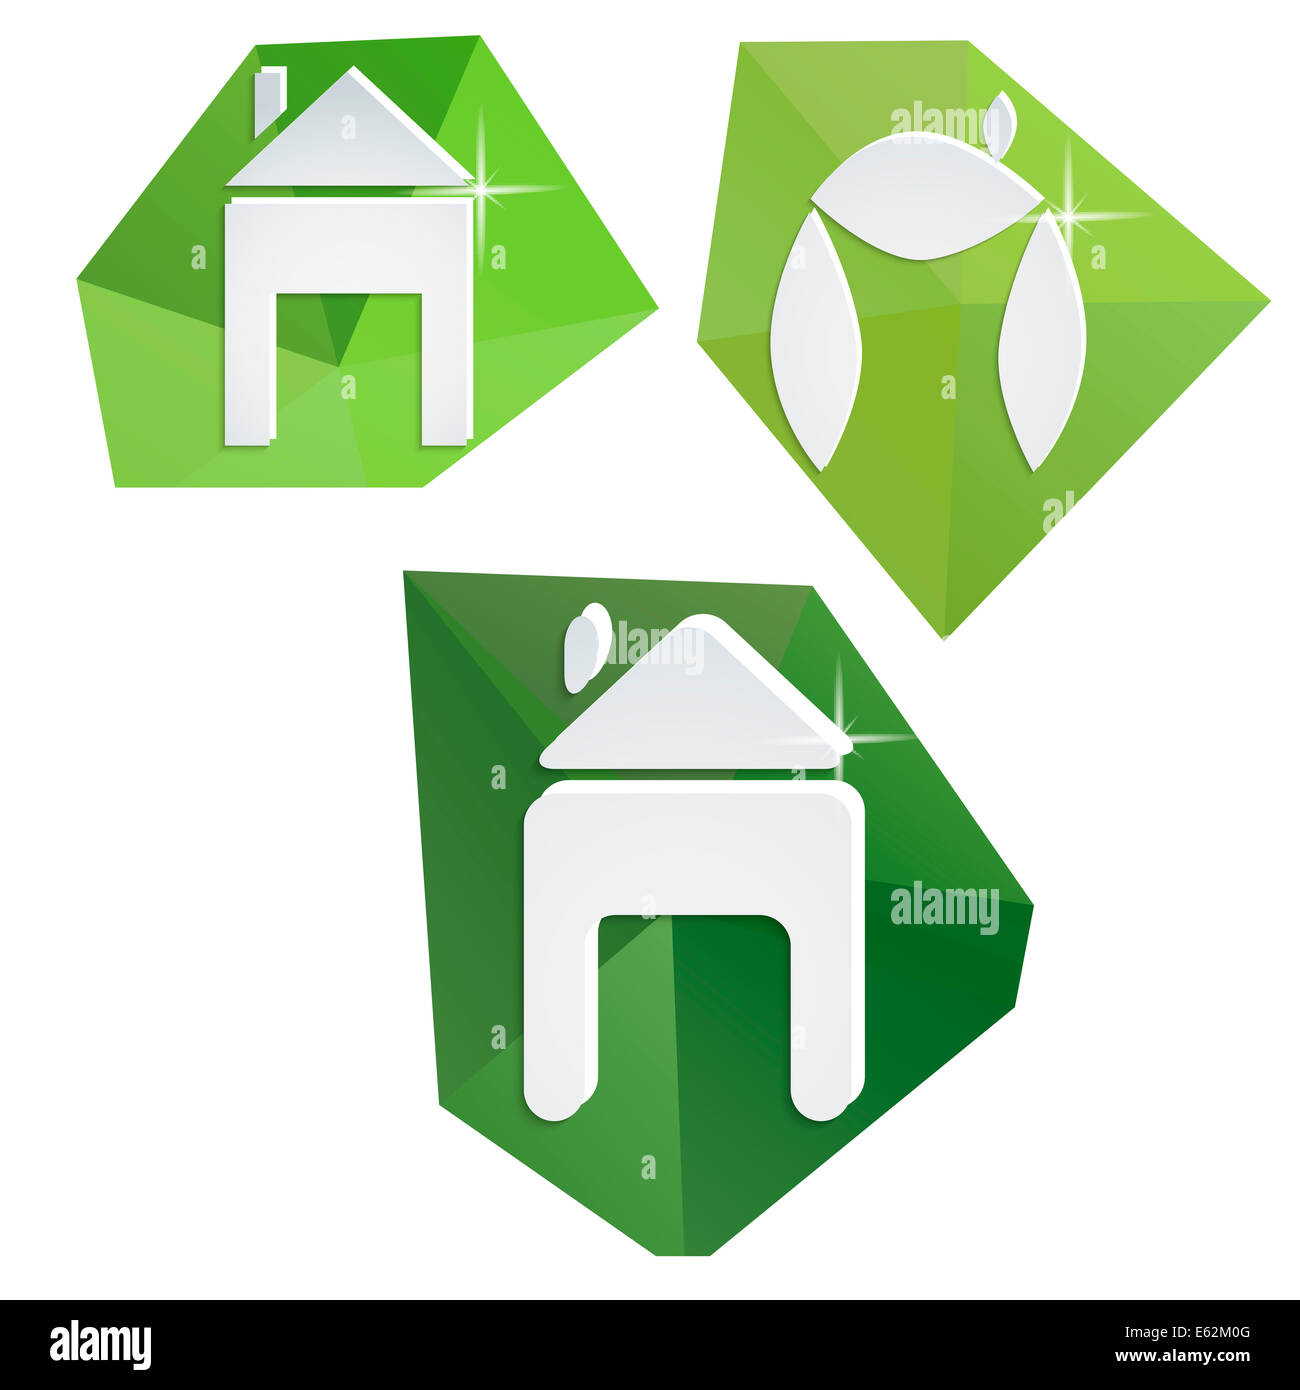 Collection of paper icons on polygonal triangular green backgrou Stock Photo